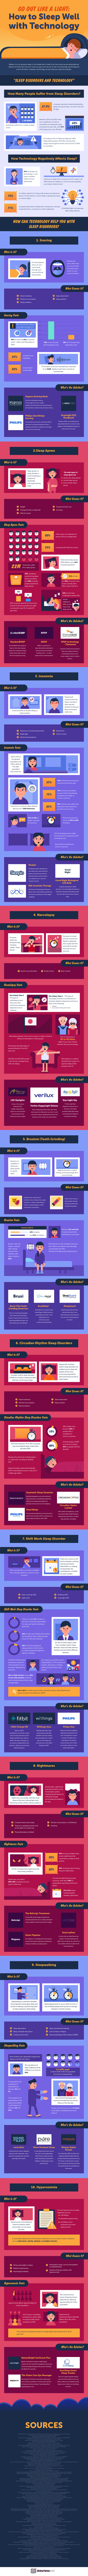 Sleep Well with Technology Infographic